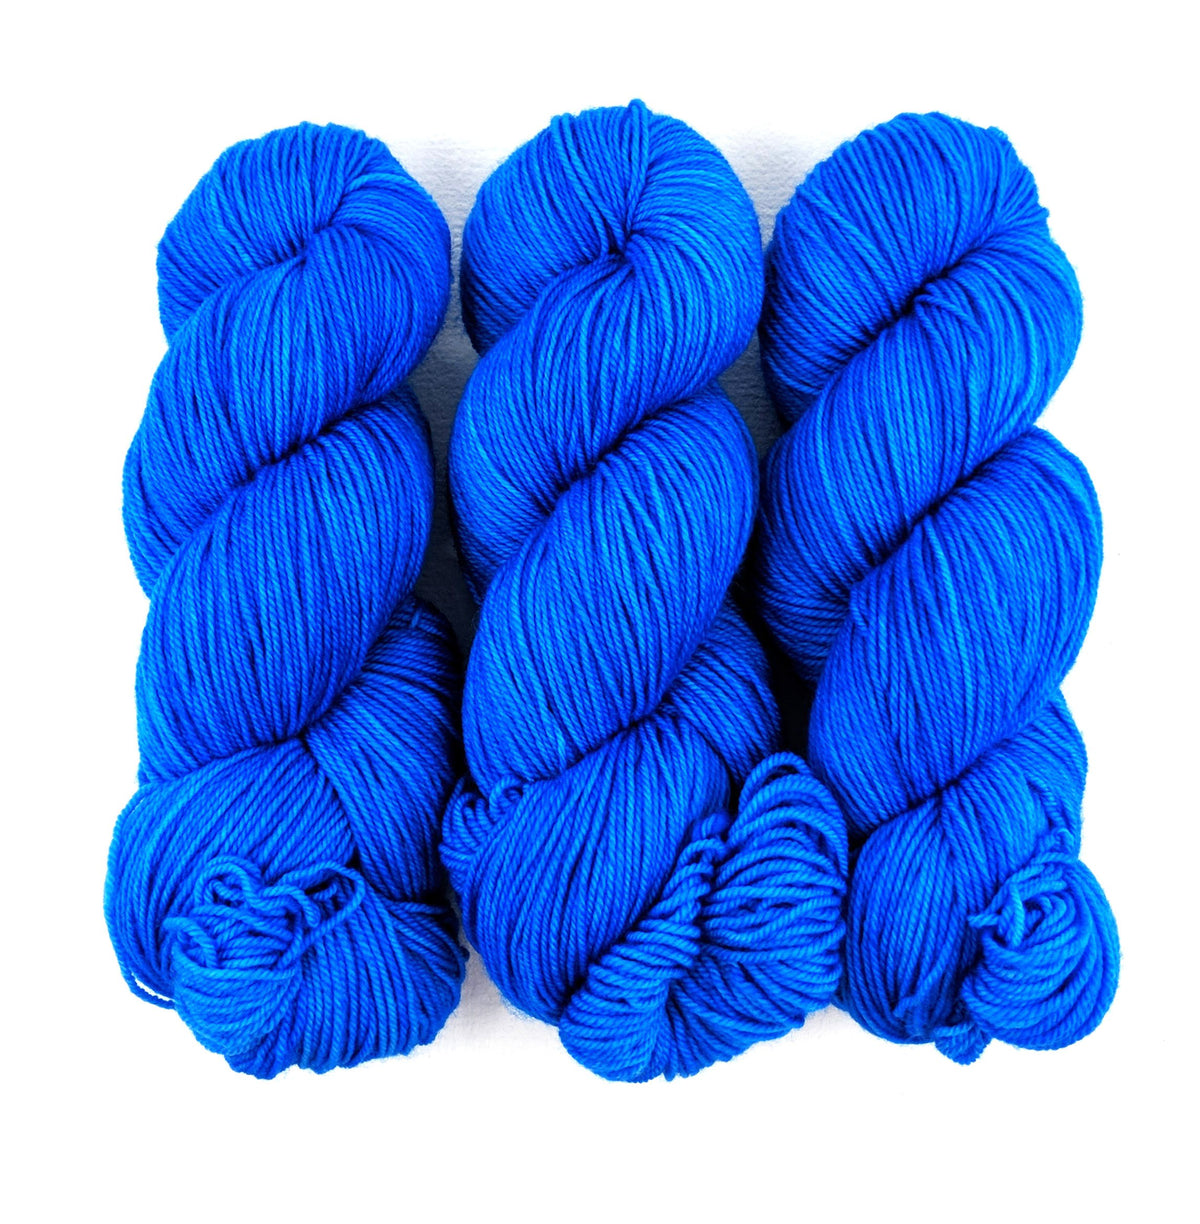 Cerulean in Worsted Weight